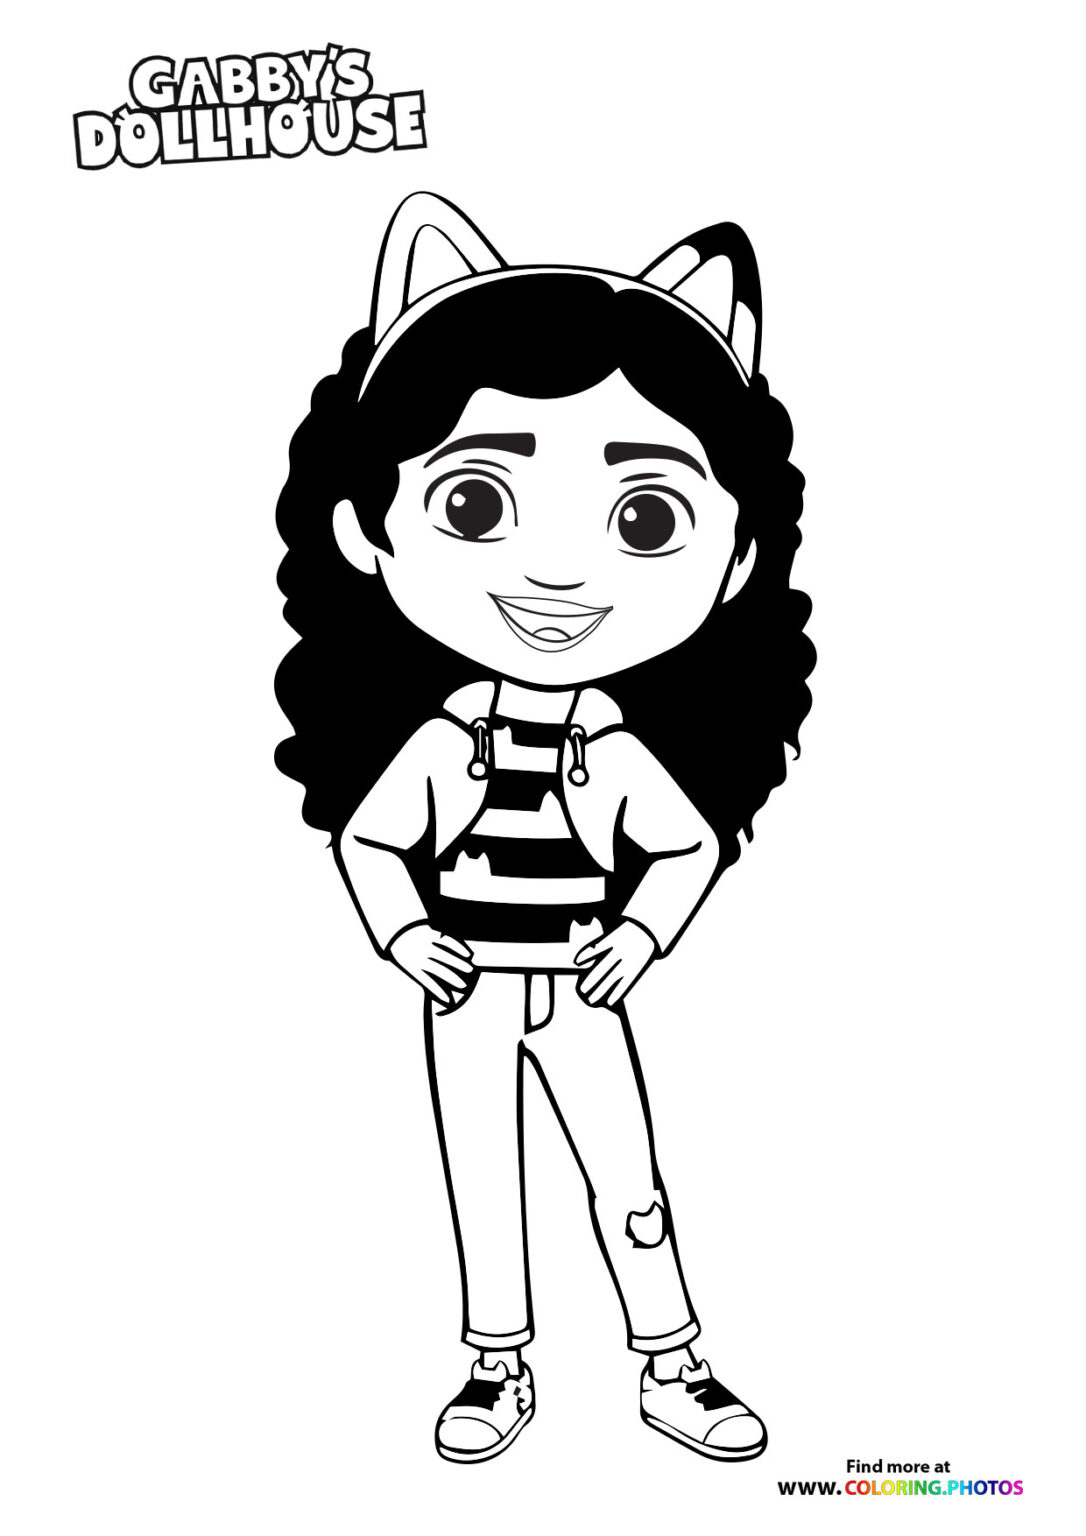 Cakey Cat - Gaby's Dollhouse - Coloring Pages for kids